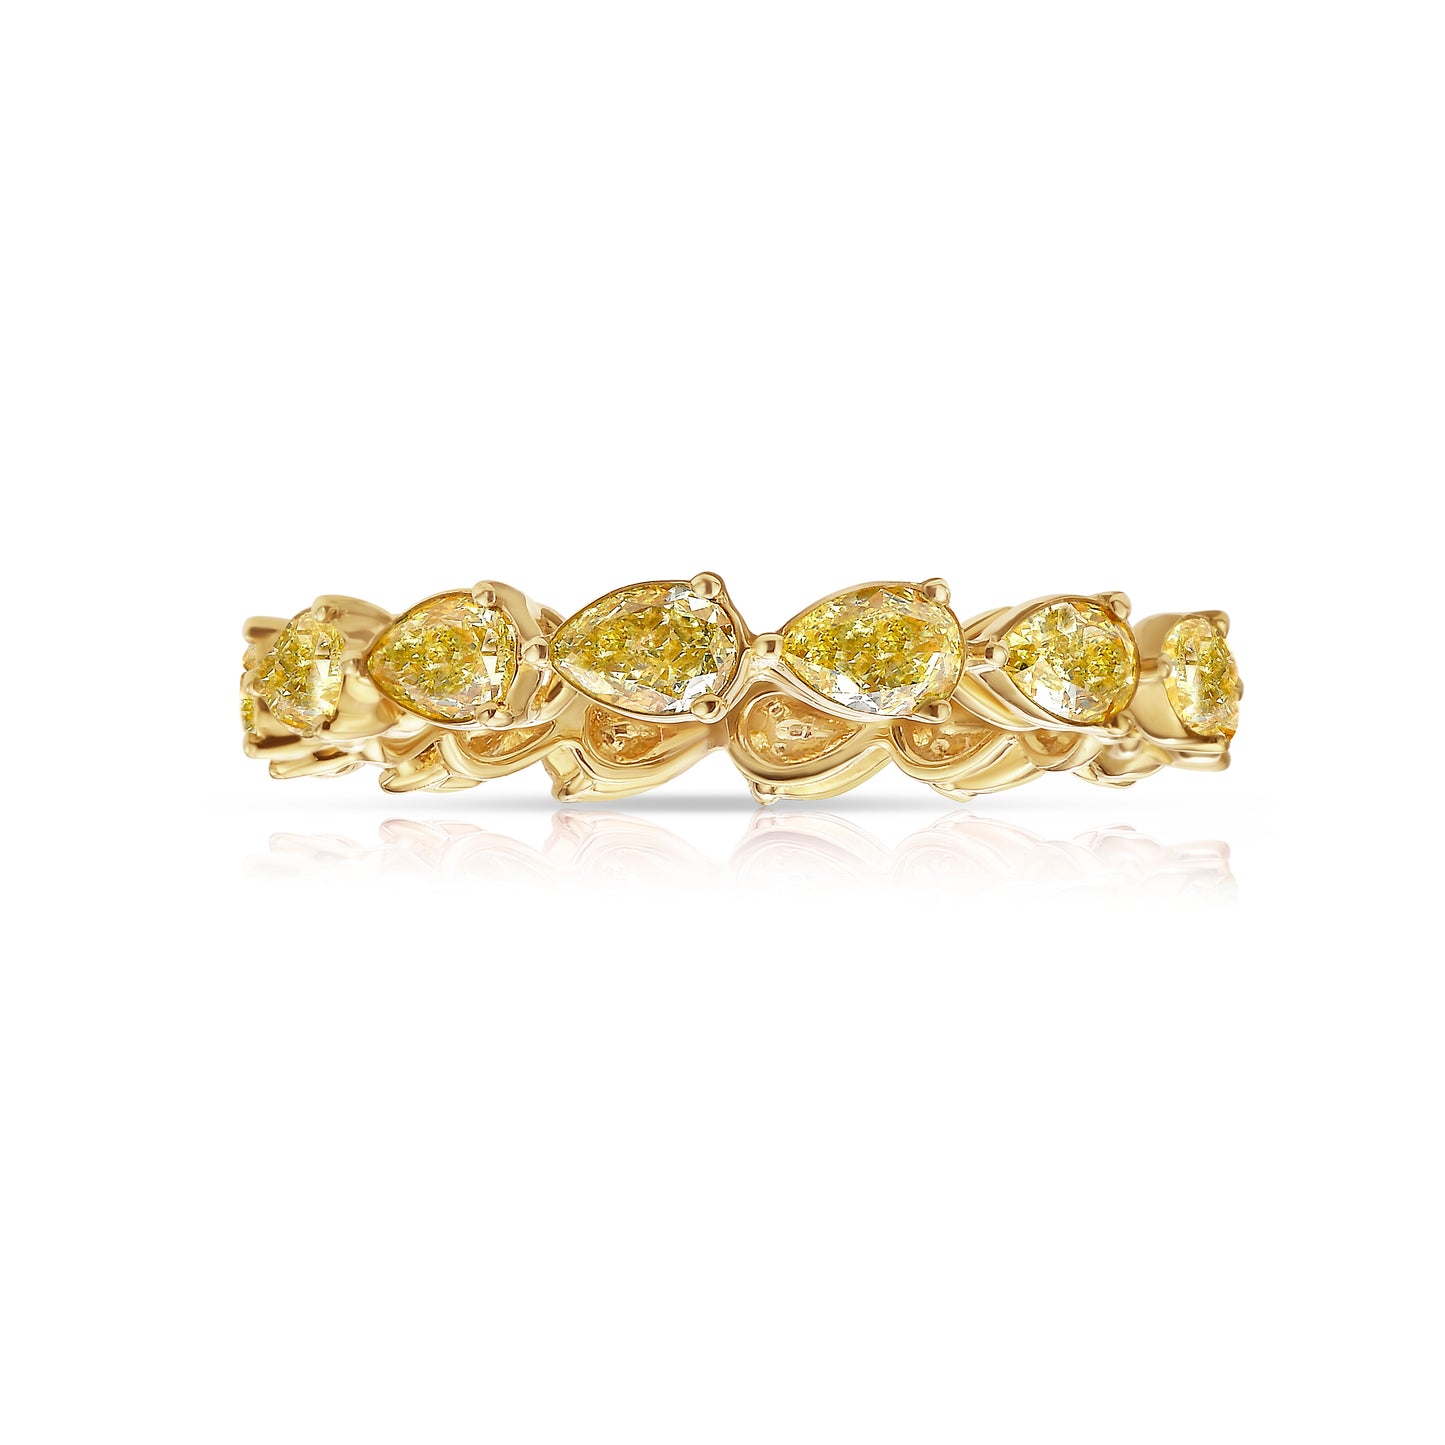 2.19 Carats Total 14 Pear Shape Diamonds Fancy Intense Yellow Diamonds Crafted in 18k Yellow Gold Handmade in NYC